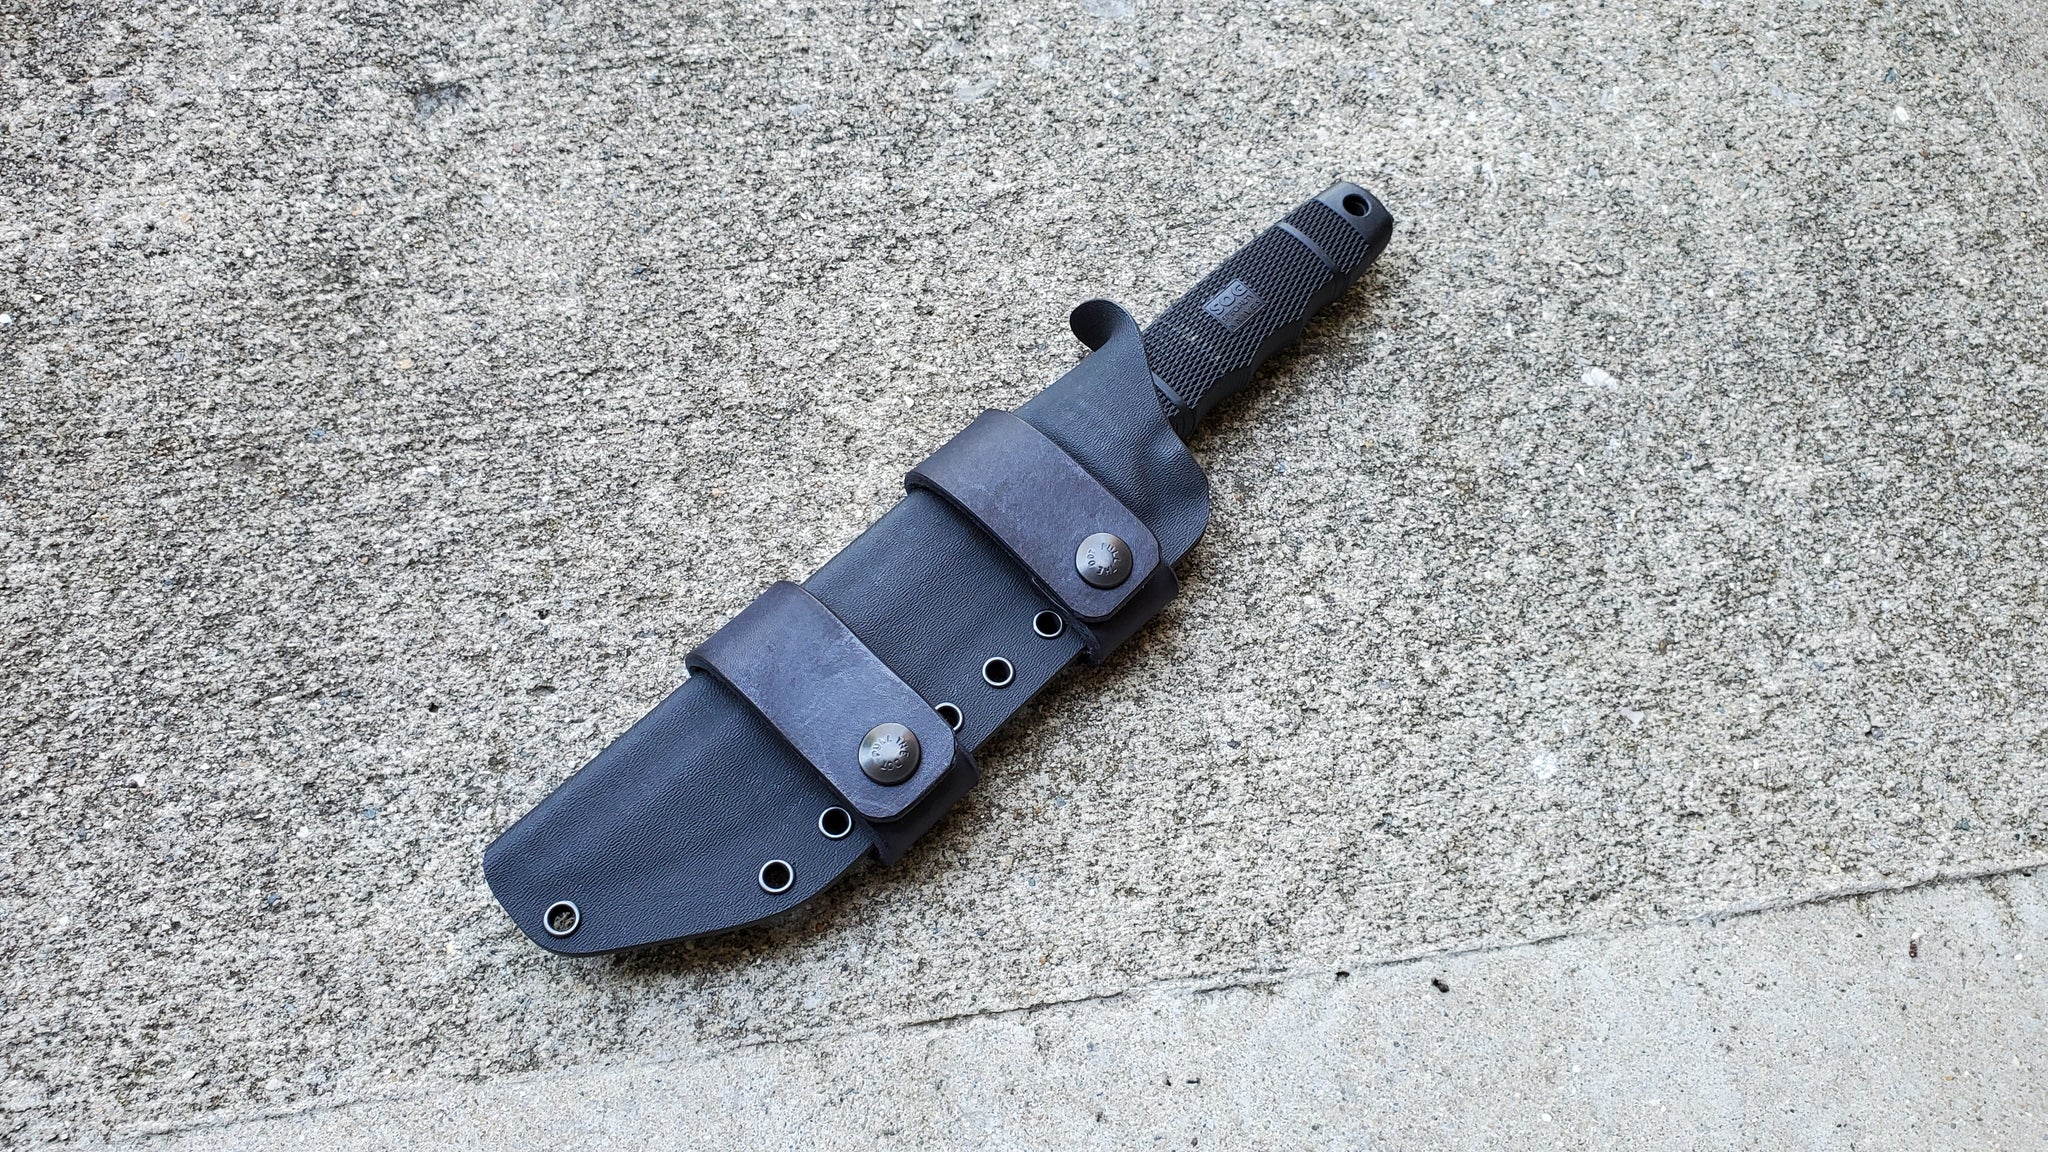 SOG SEAL TEAM ELITE Taco Style custom Kydex Sheath in Scout Carry with 2 single snaps